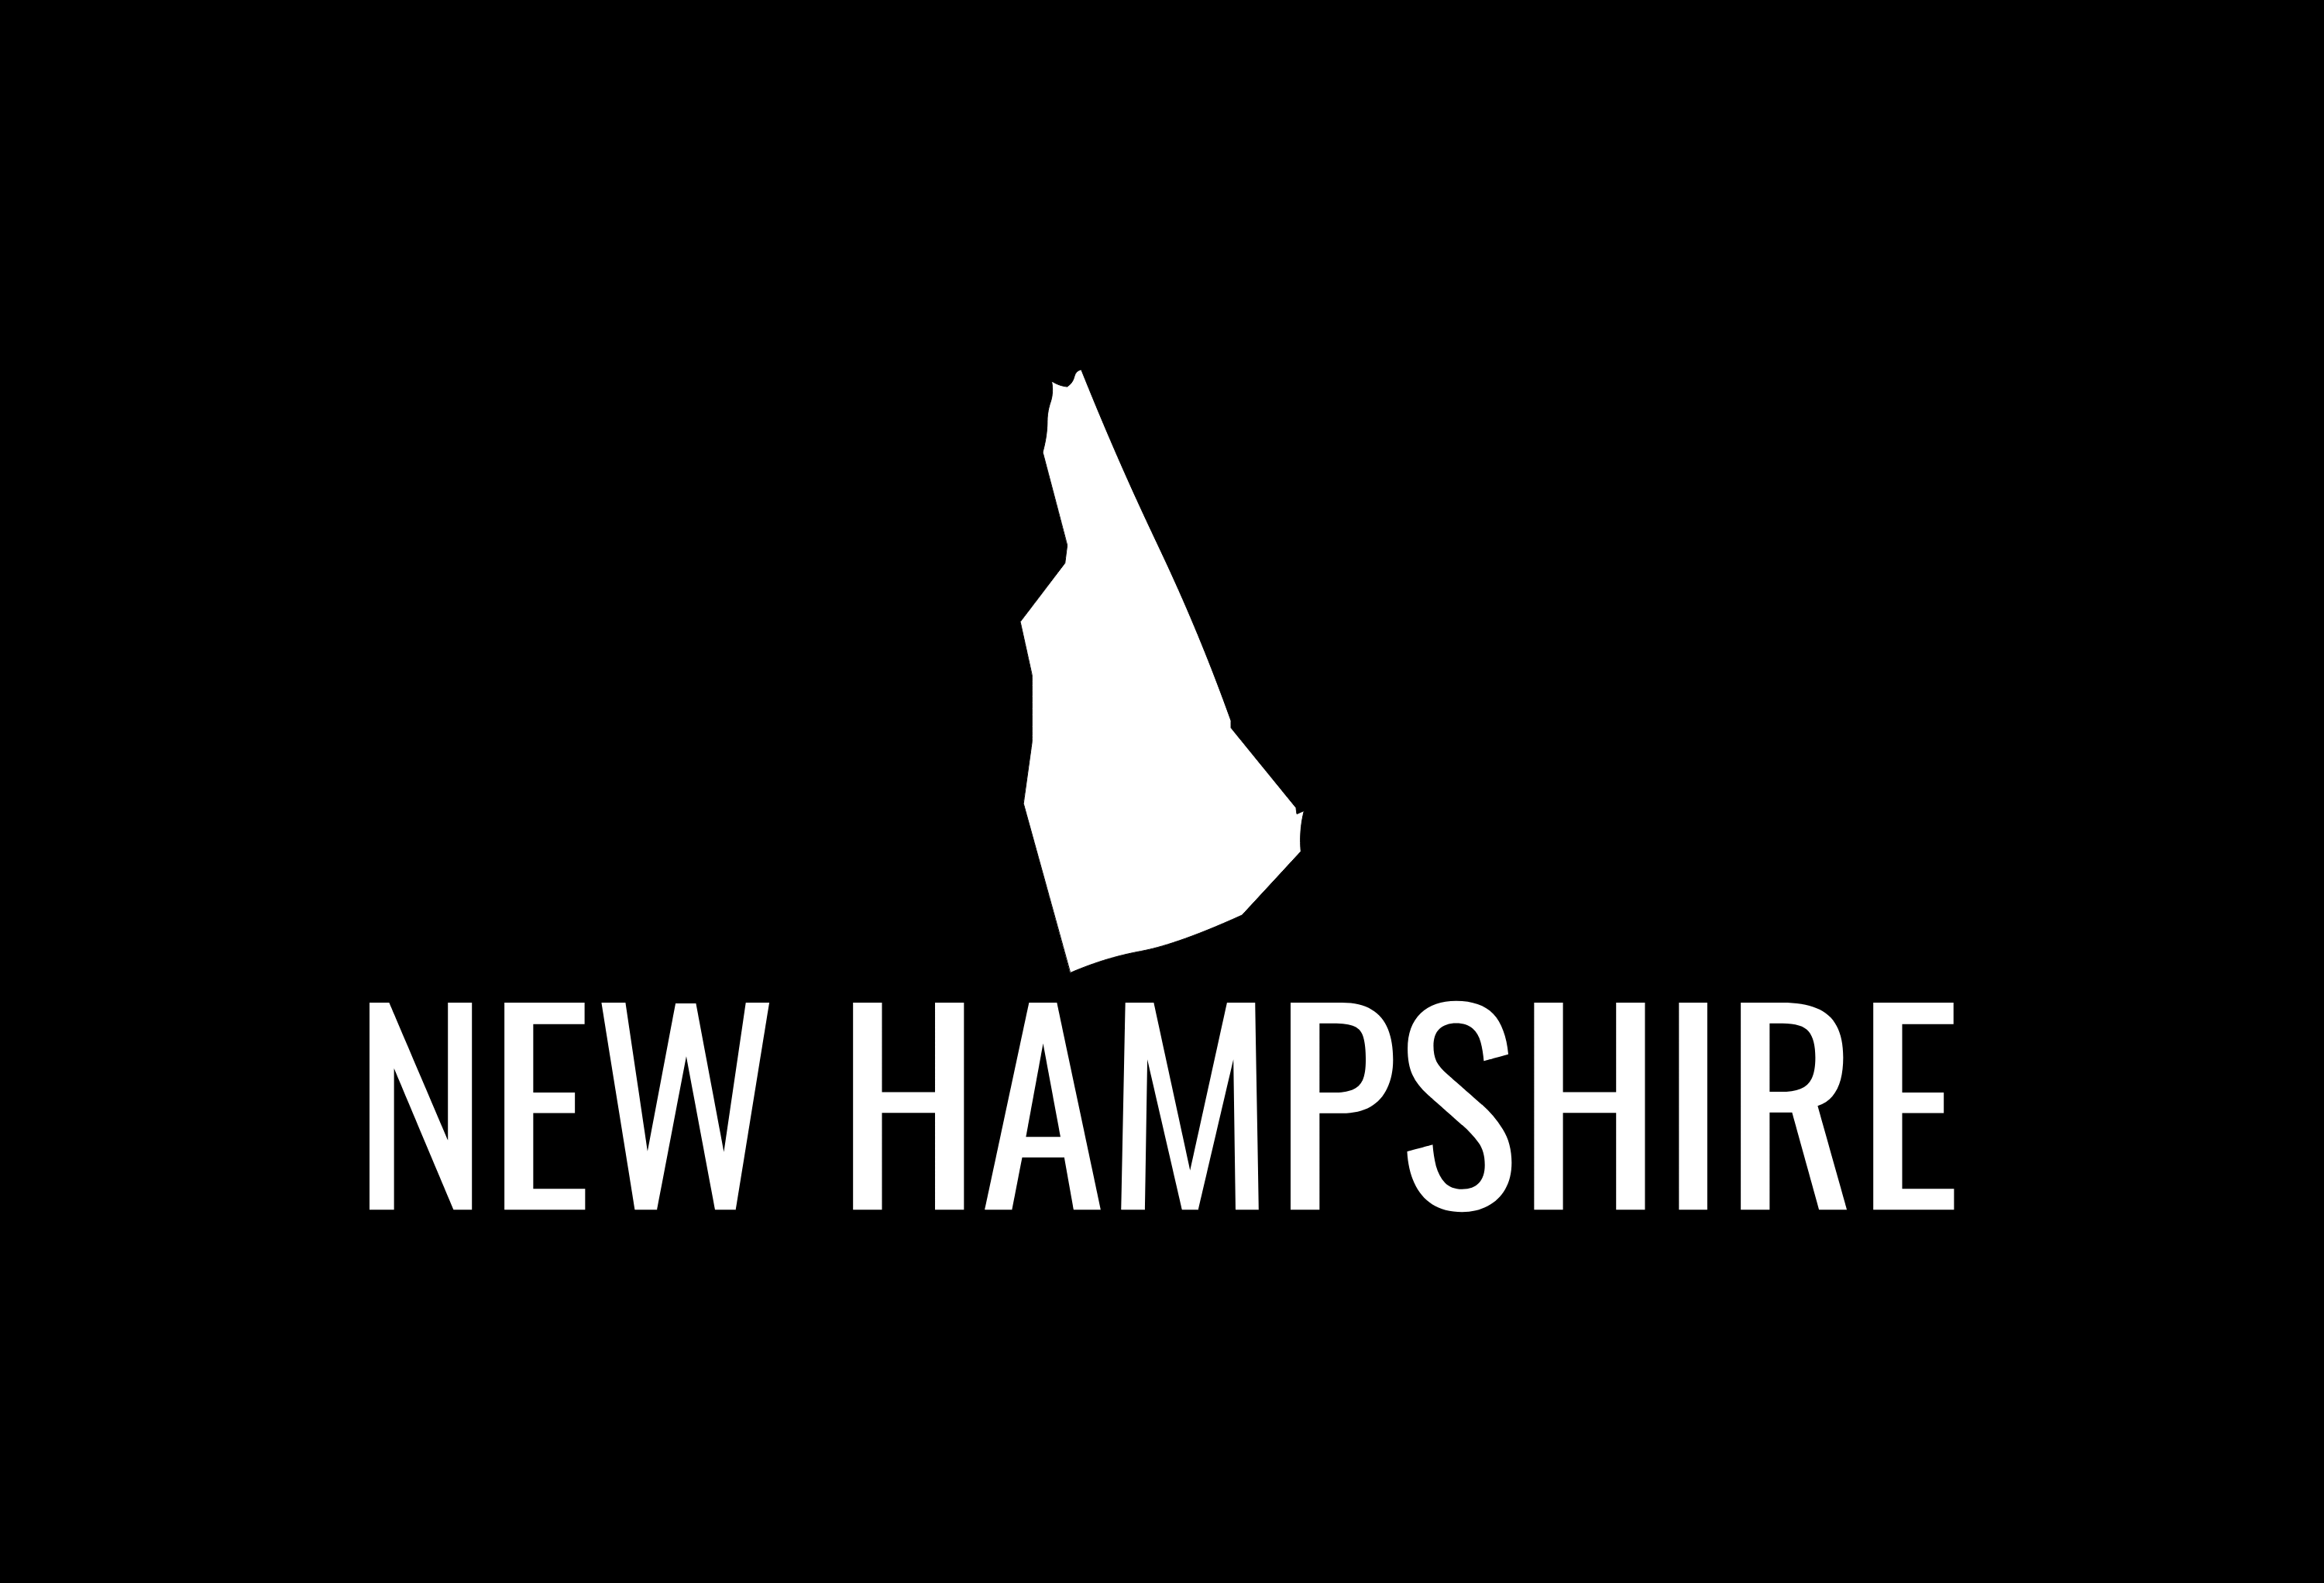 New Hampshire State Map Car Decal - Permanent Vinyl Sticker for Cars, Vehicle, Doors, Windows, Laptop, and more!